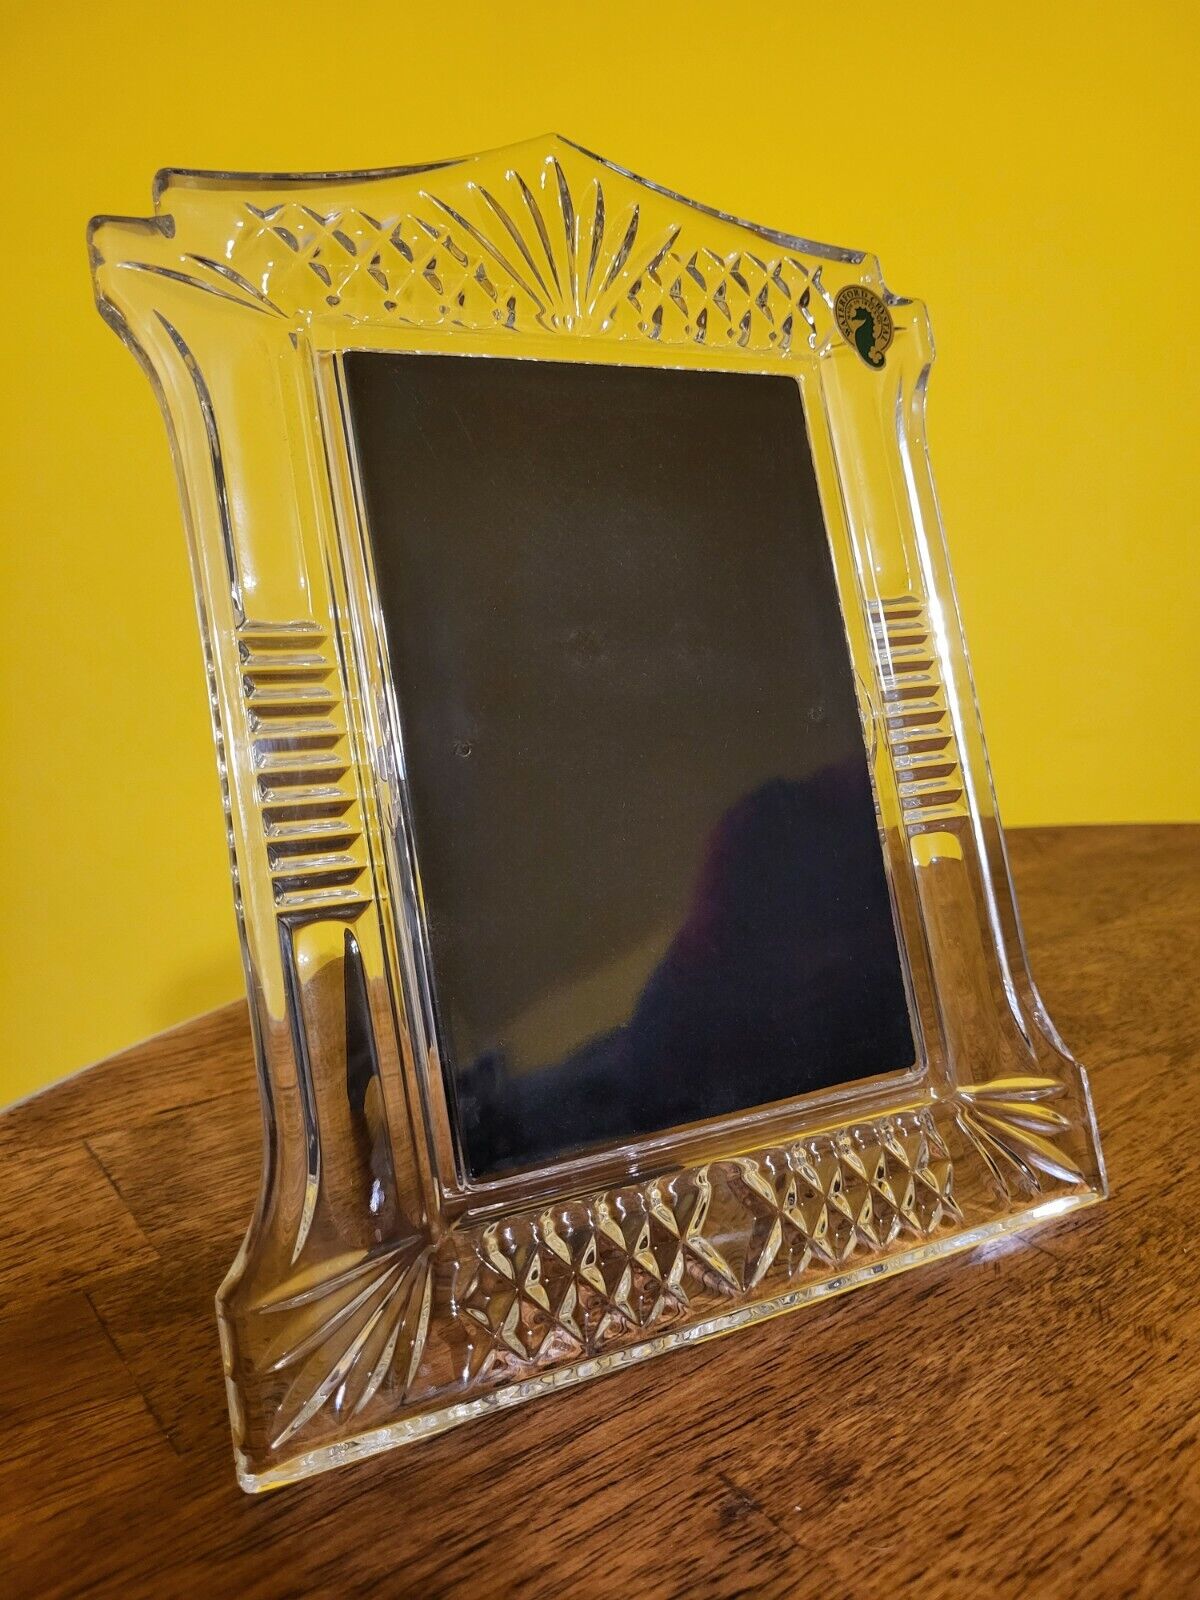 Waterford Crystal Ireland 4x6 Picture Photo Frame Abbeville Cut Glass